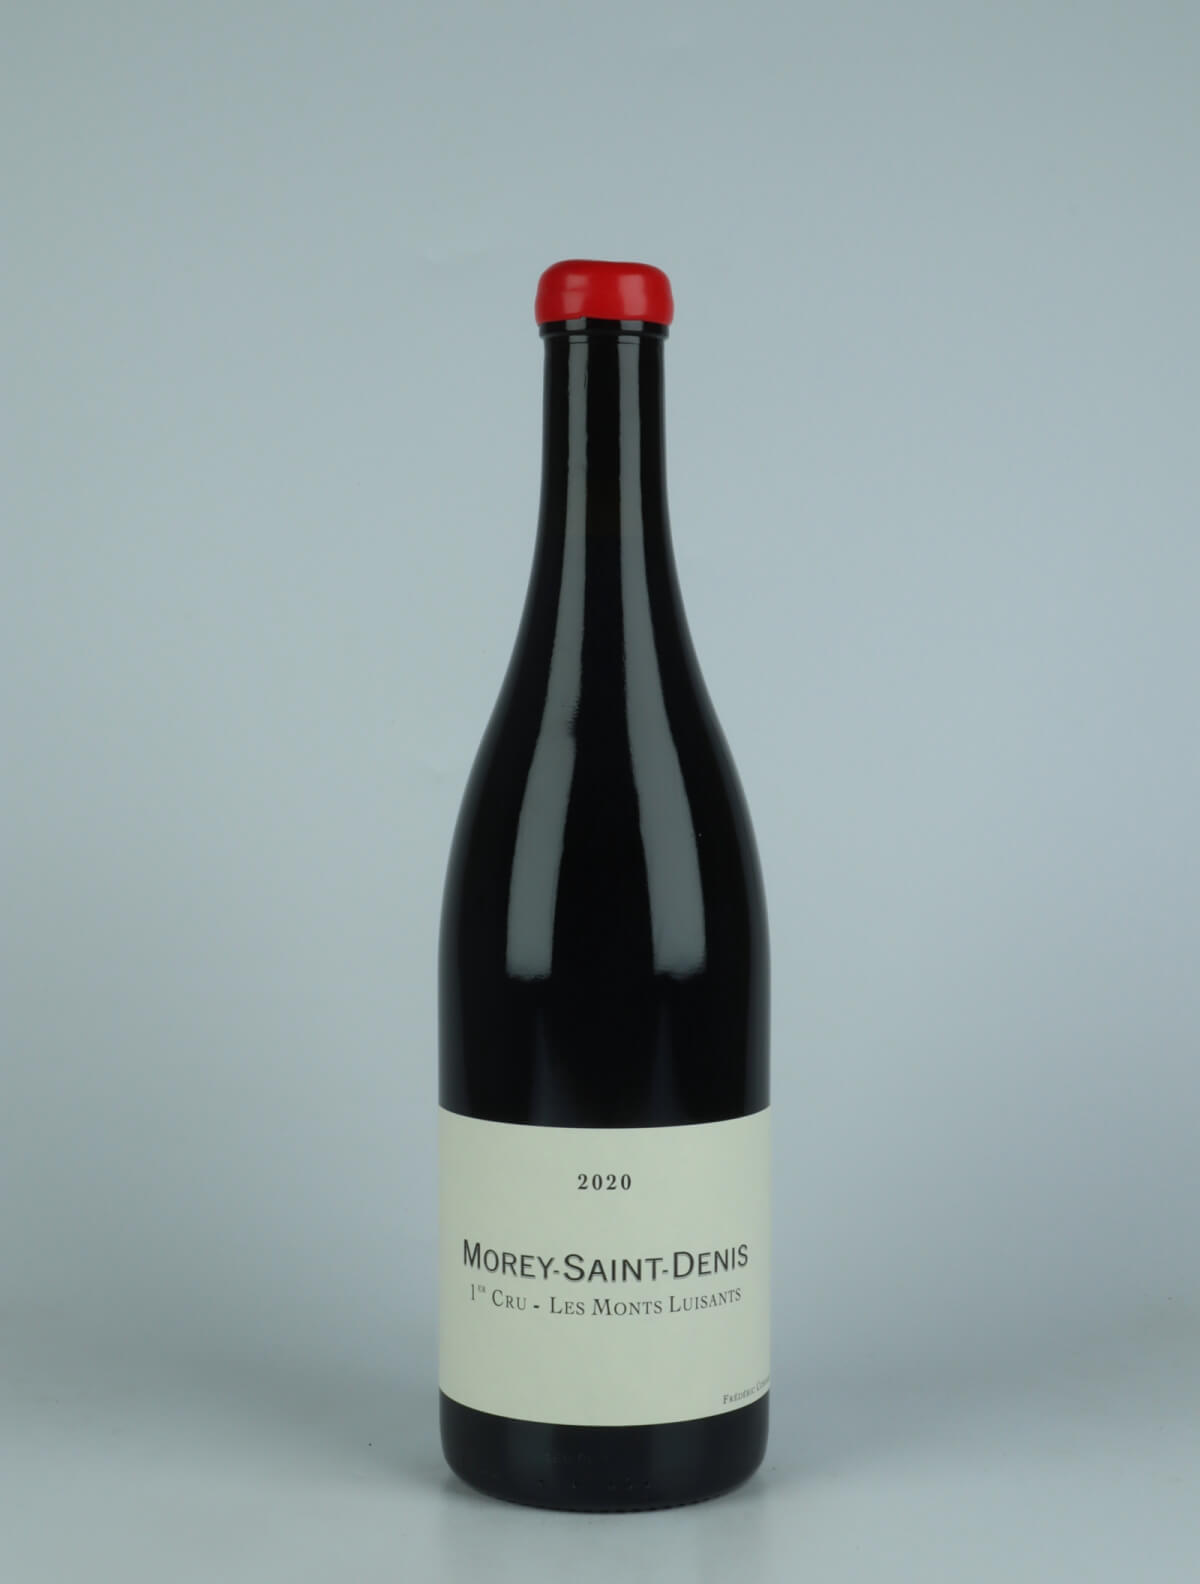 A bottle 2020 Morey Saint Denis 1. Cru - Les Monts Luisants Red wine from Frédéric Cossard, Burgundy in France